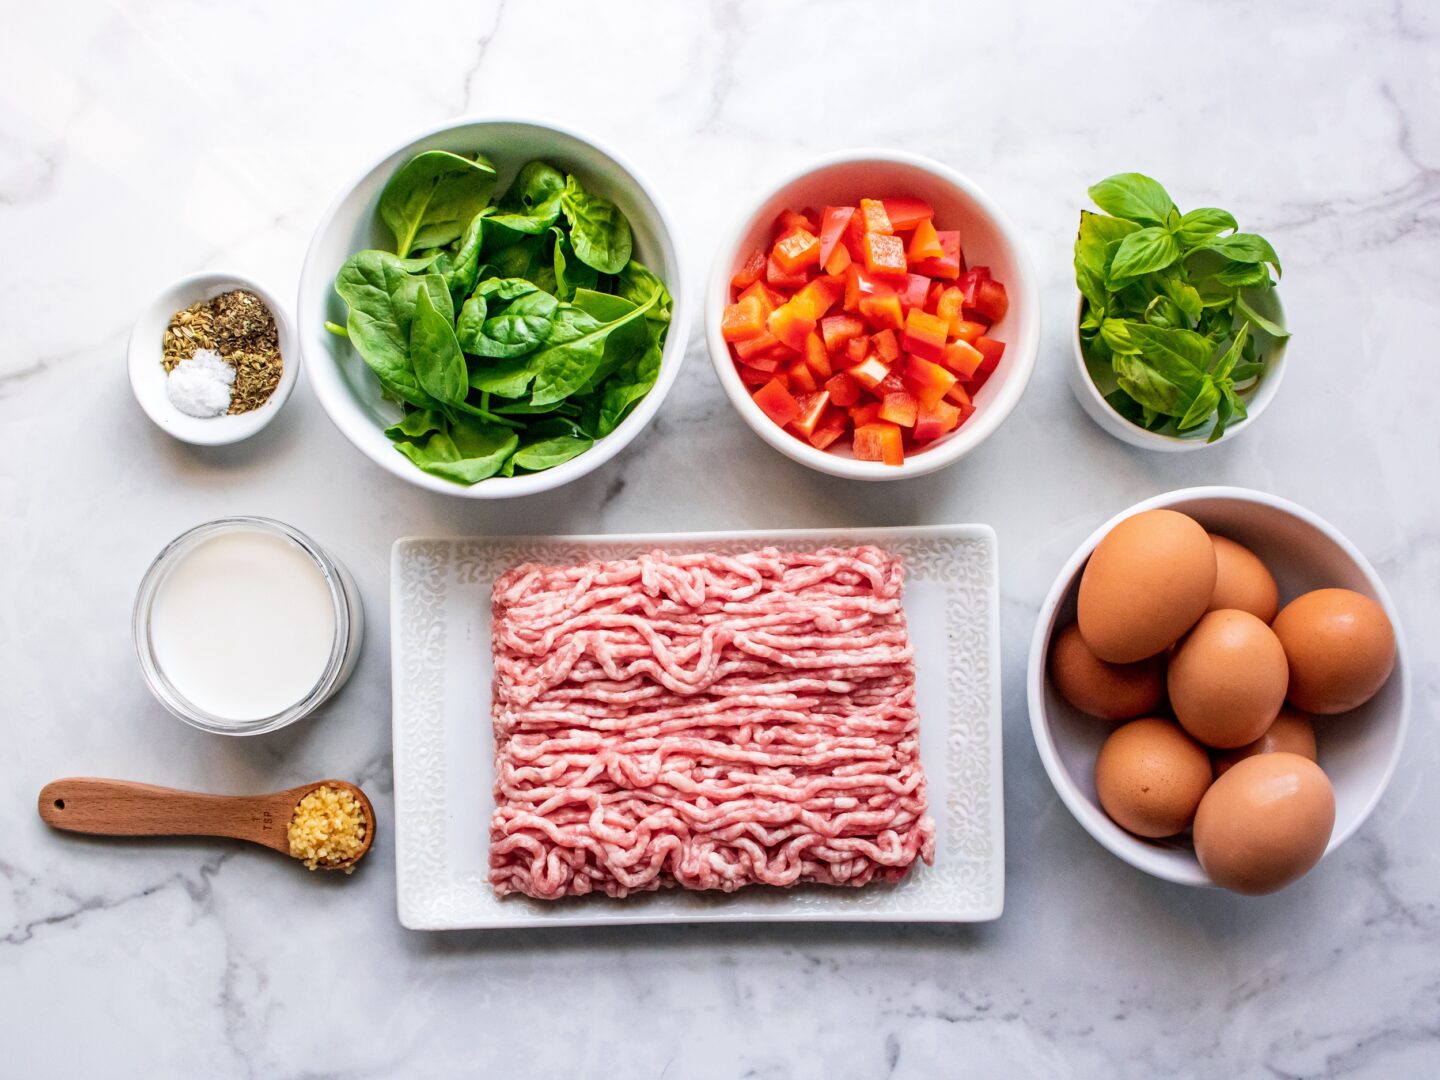 Ingredients for a protein-packed breakfast casserole